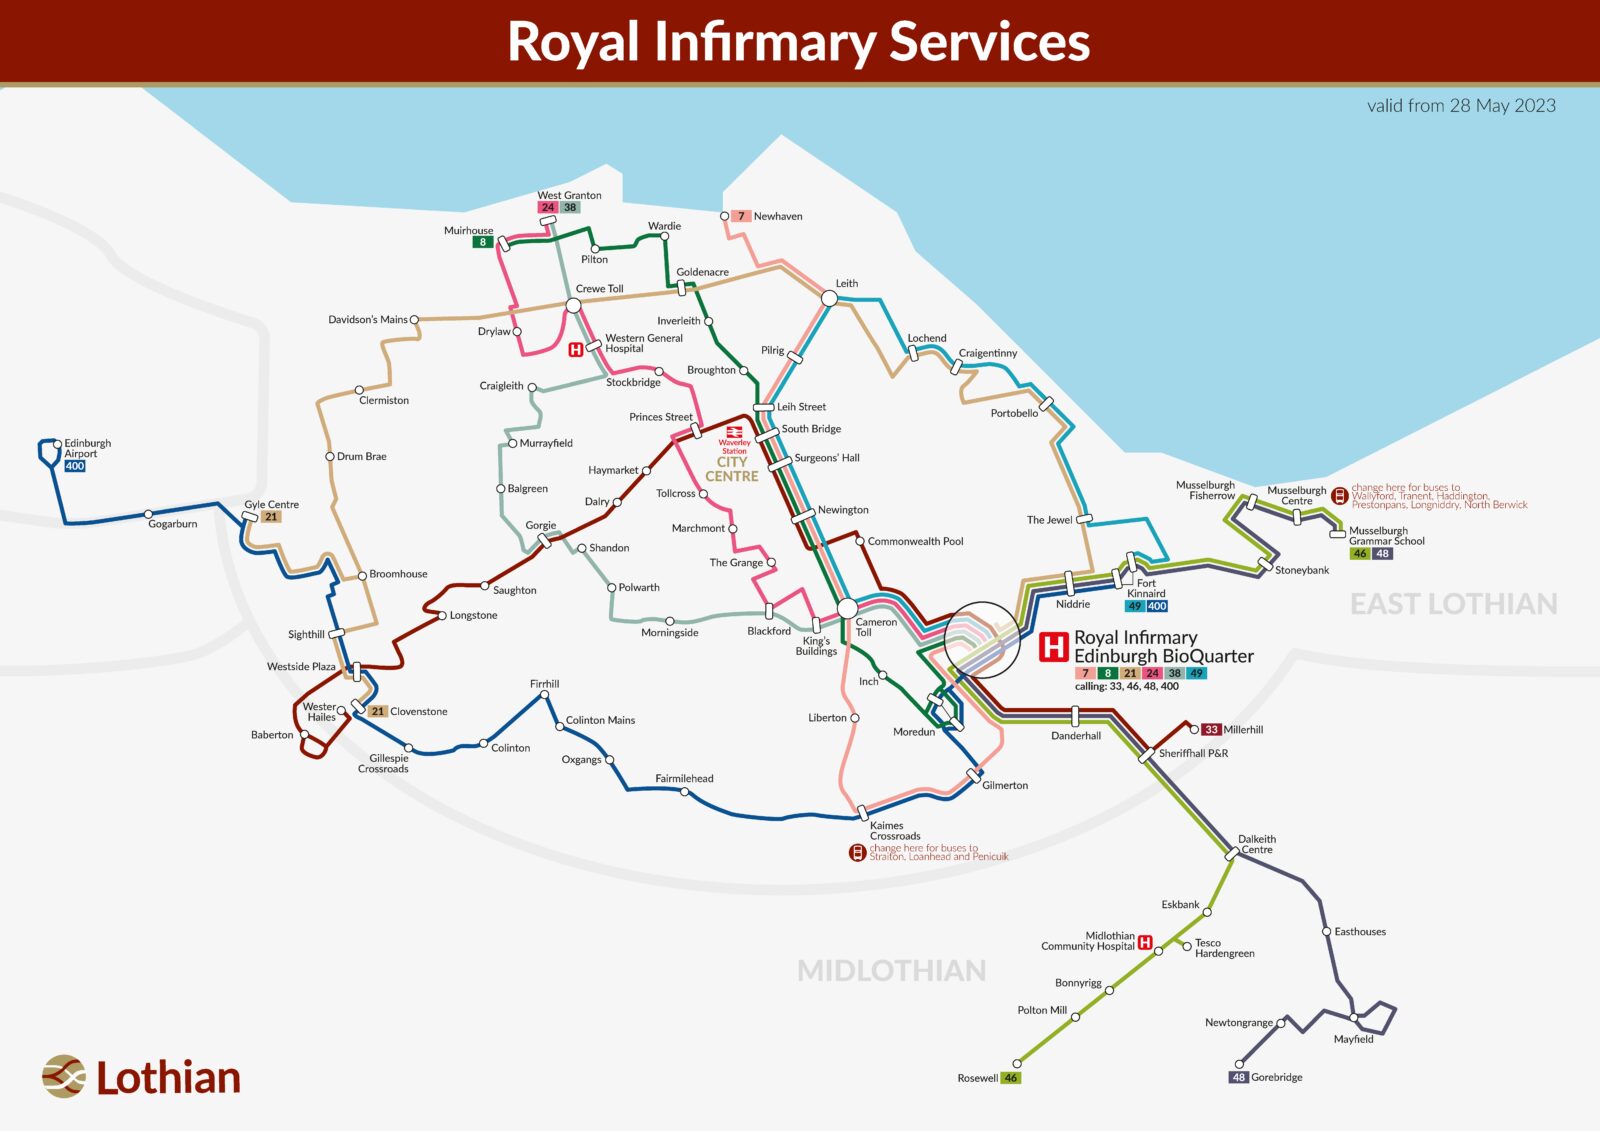 Royal Infirmary Services